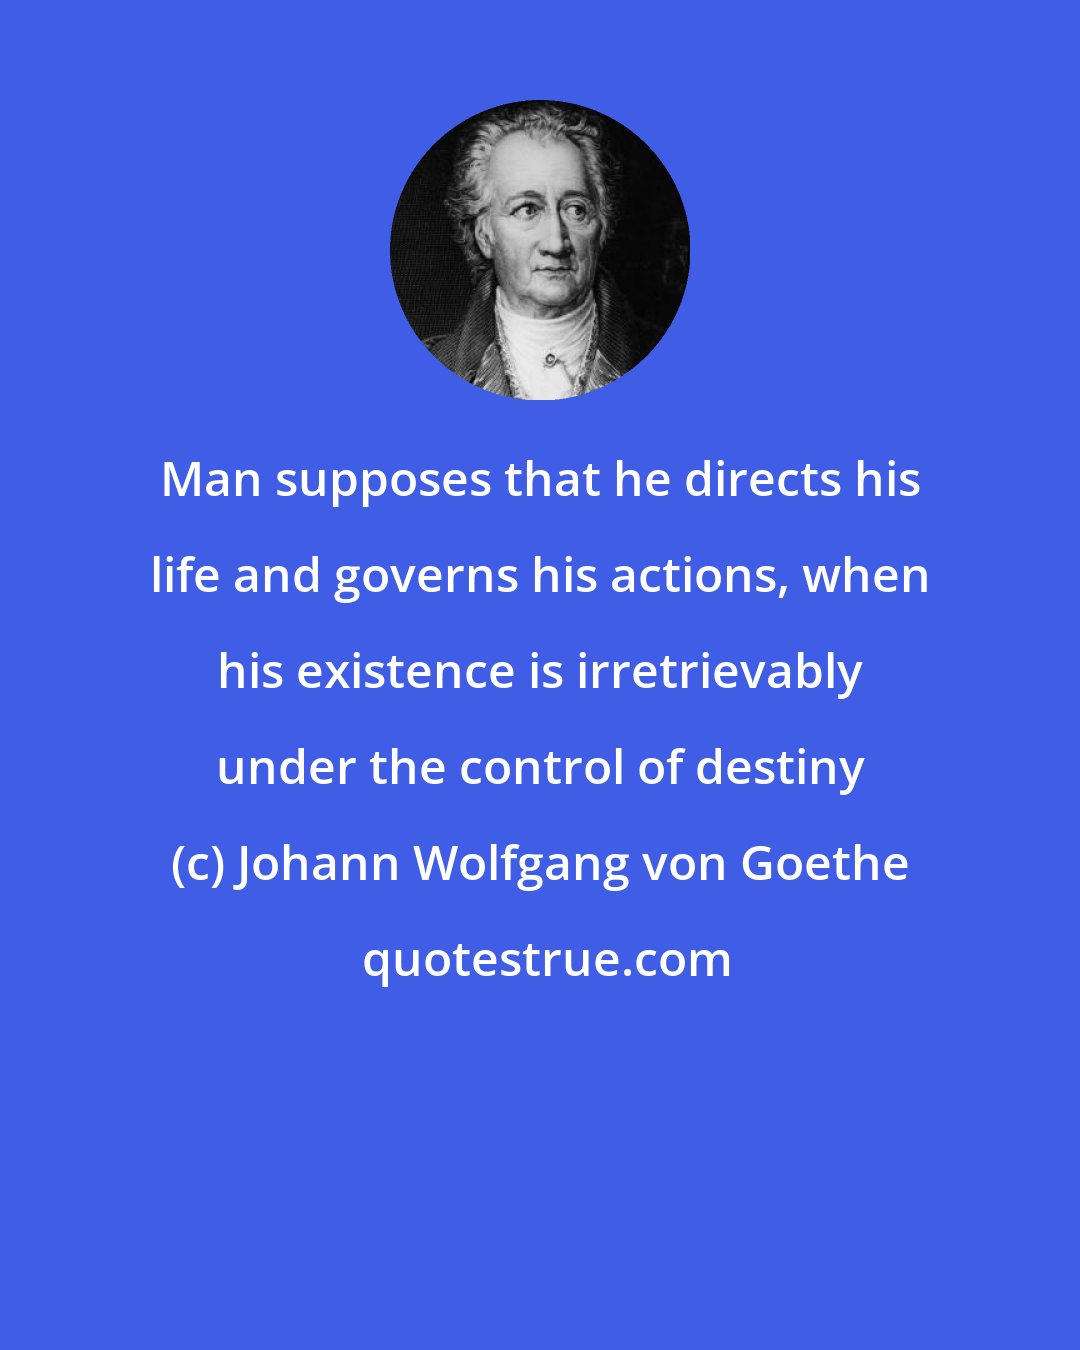 Johann Wolfgang von Goethe: Man supposes that he directs his life and governs his actions, when his existence is irretrievably under the control of destiny